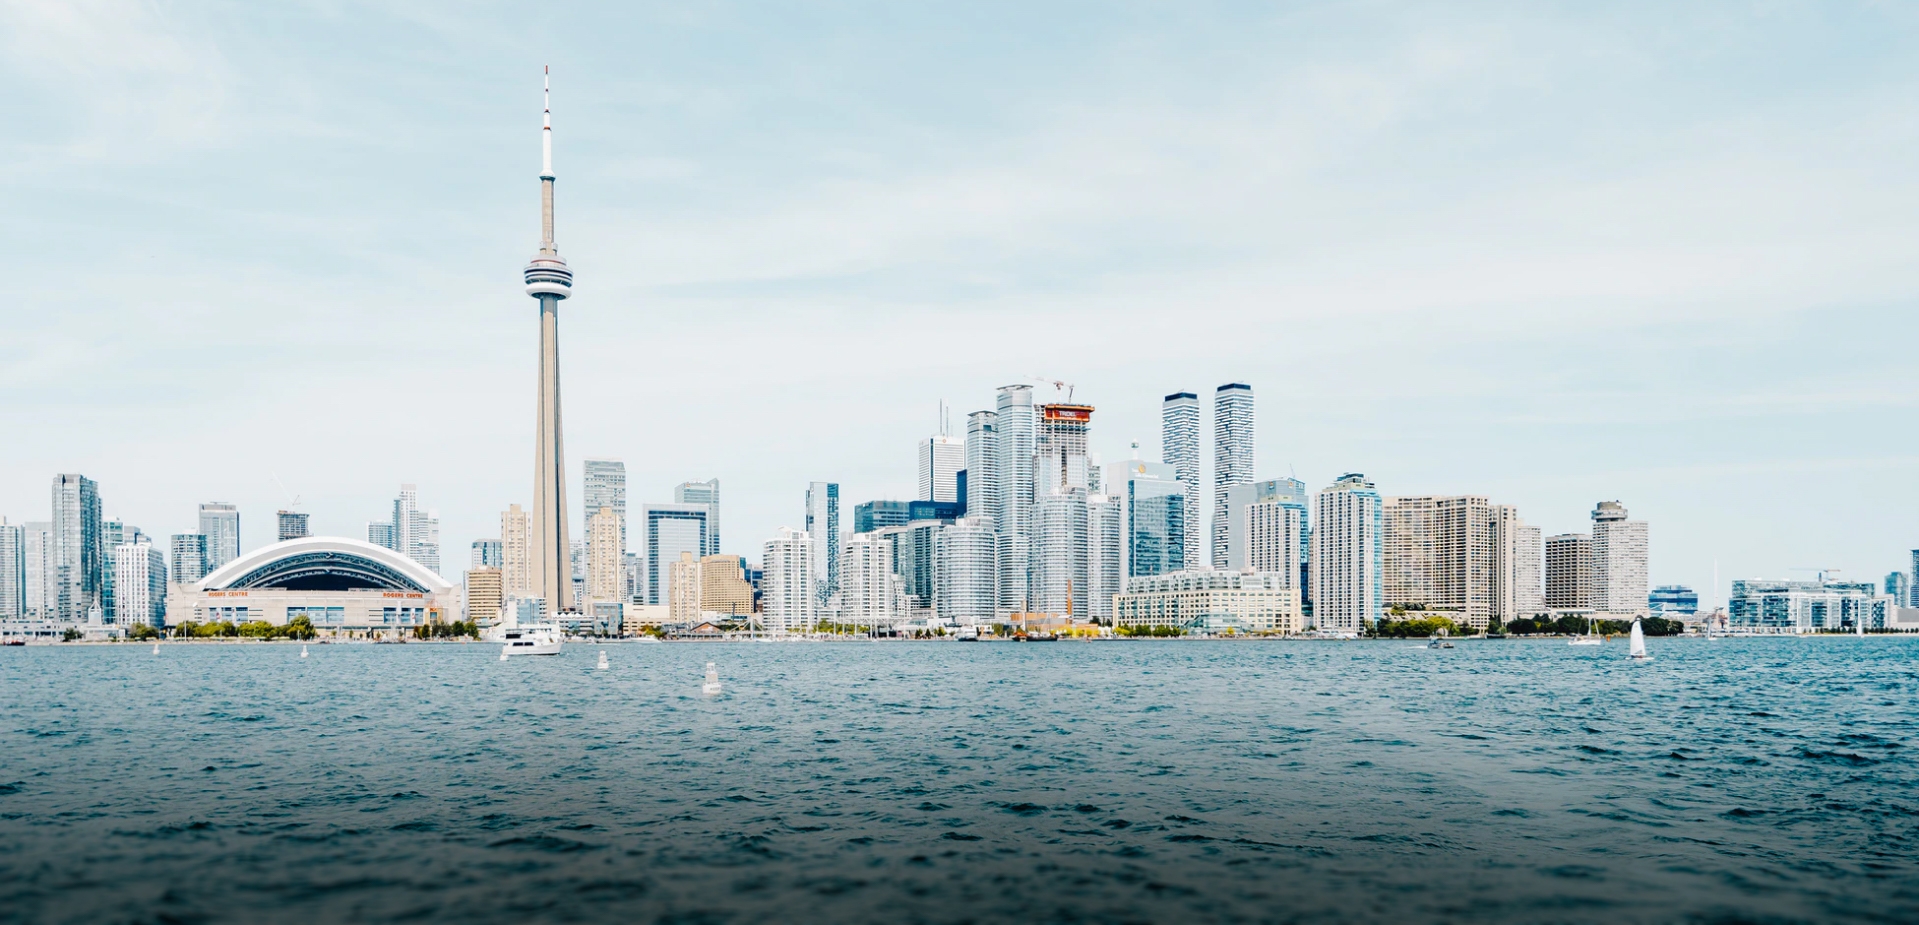 Images of Toronto's skyline on a sunny day, with a body of water in the foreground.